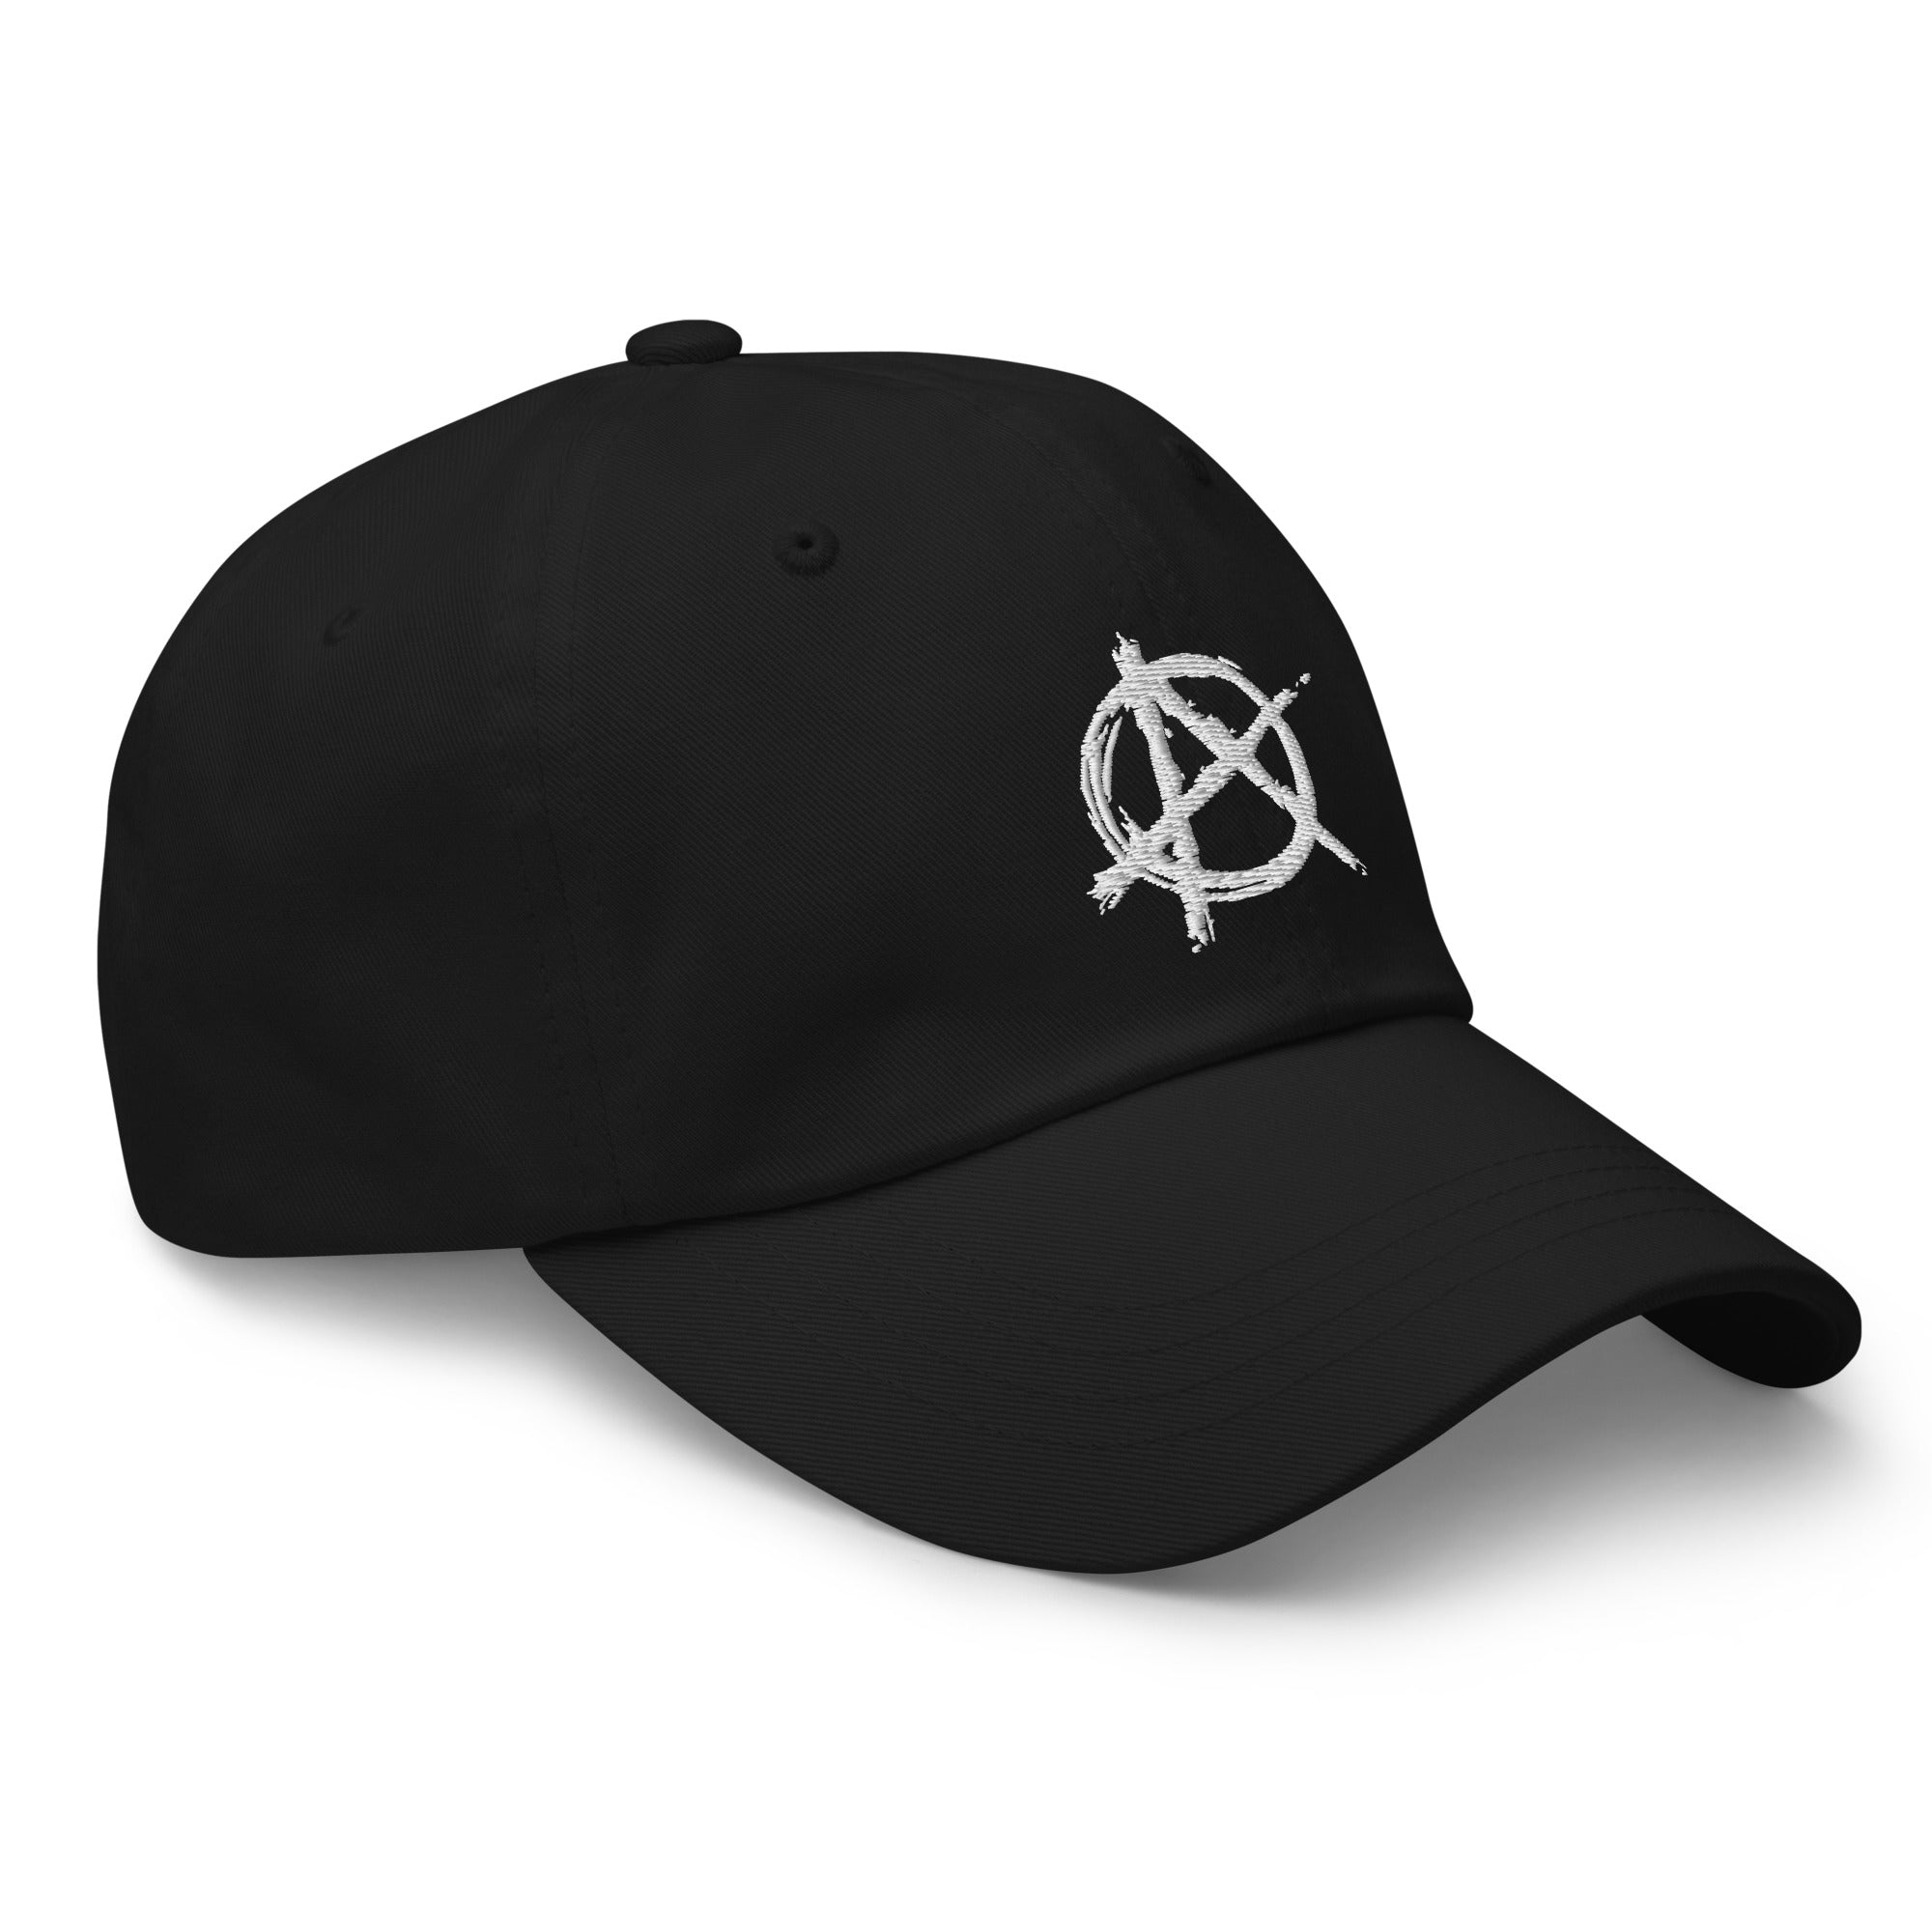 Anarchy Sign Punk Chaos and Rock n' Roll Embroidered Baseball Cap Dad hat - Edge of Life Designs